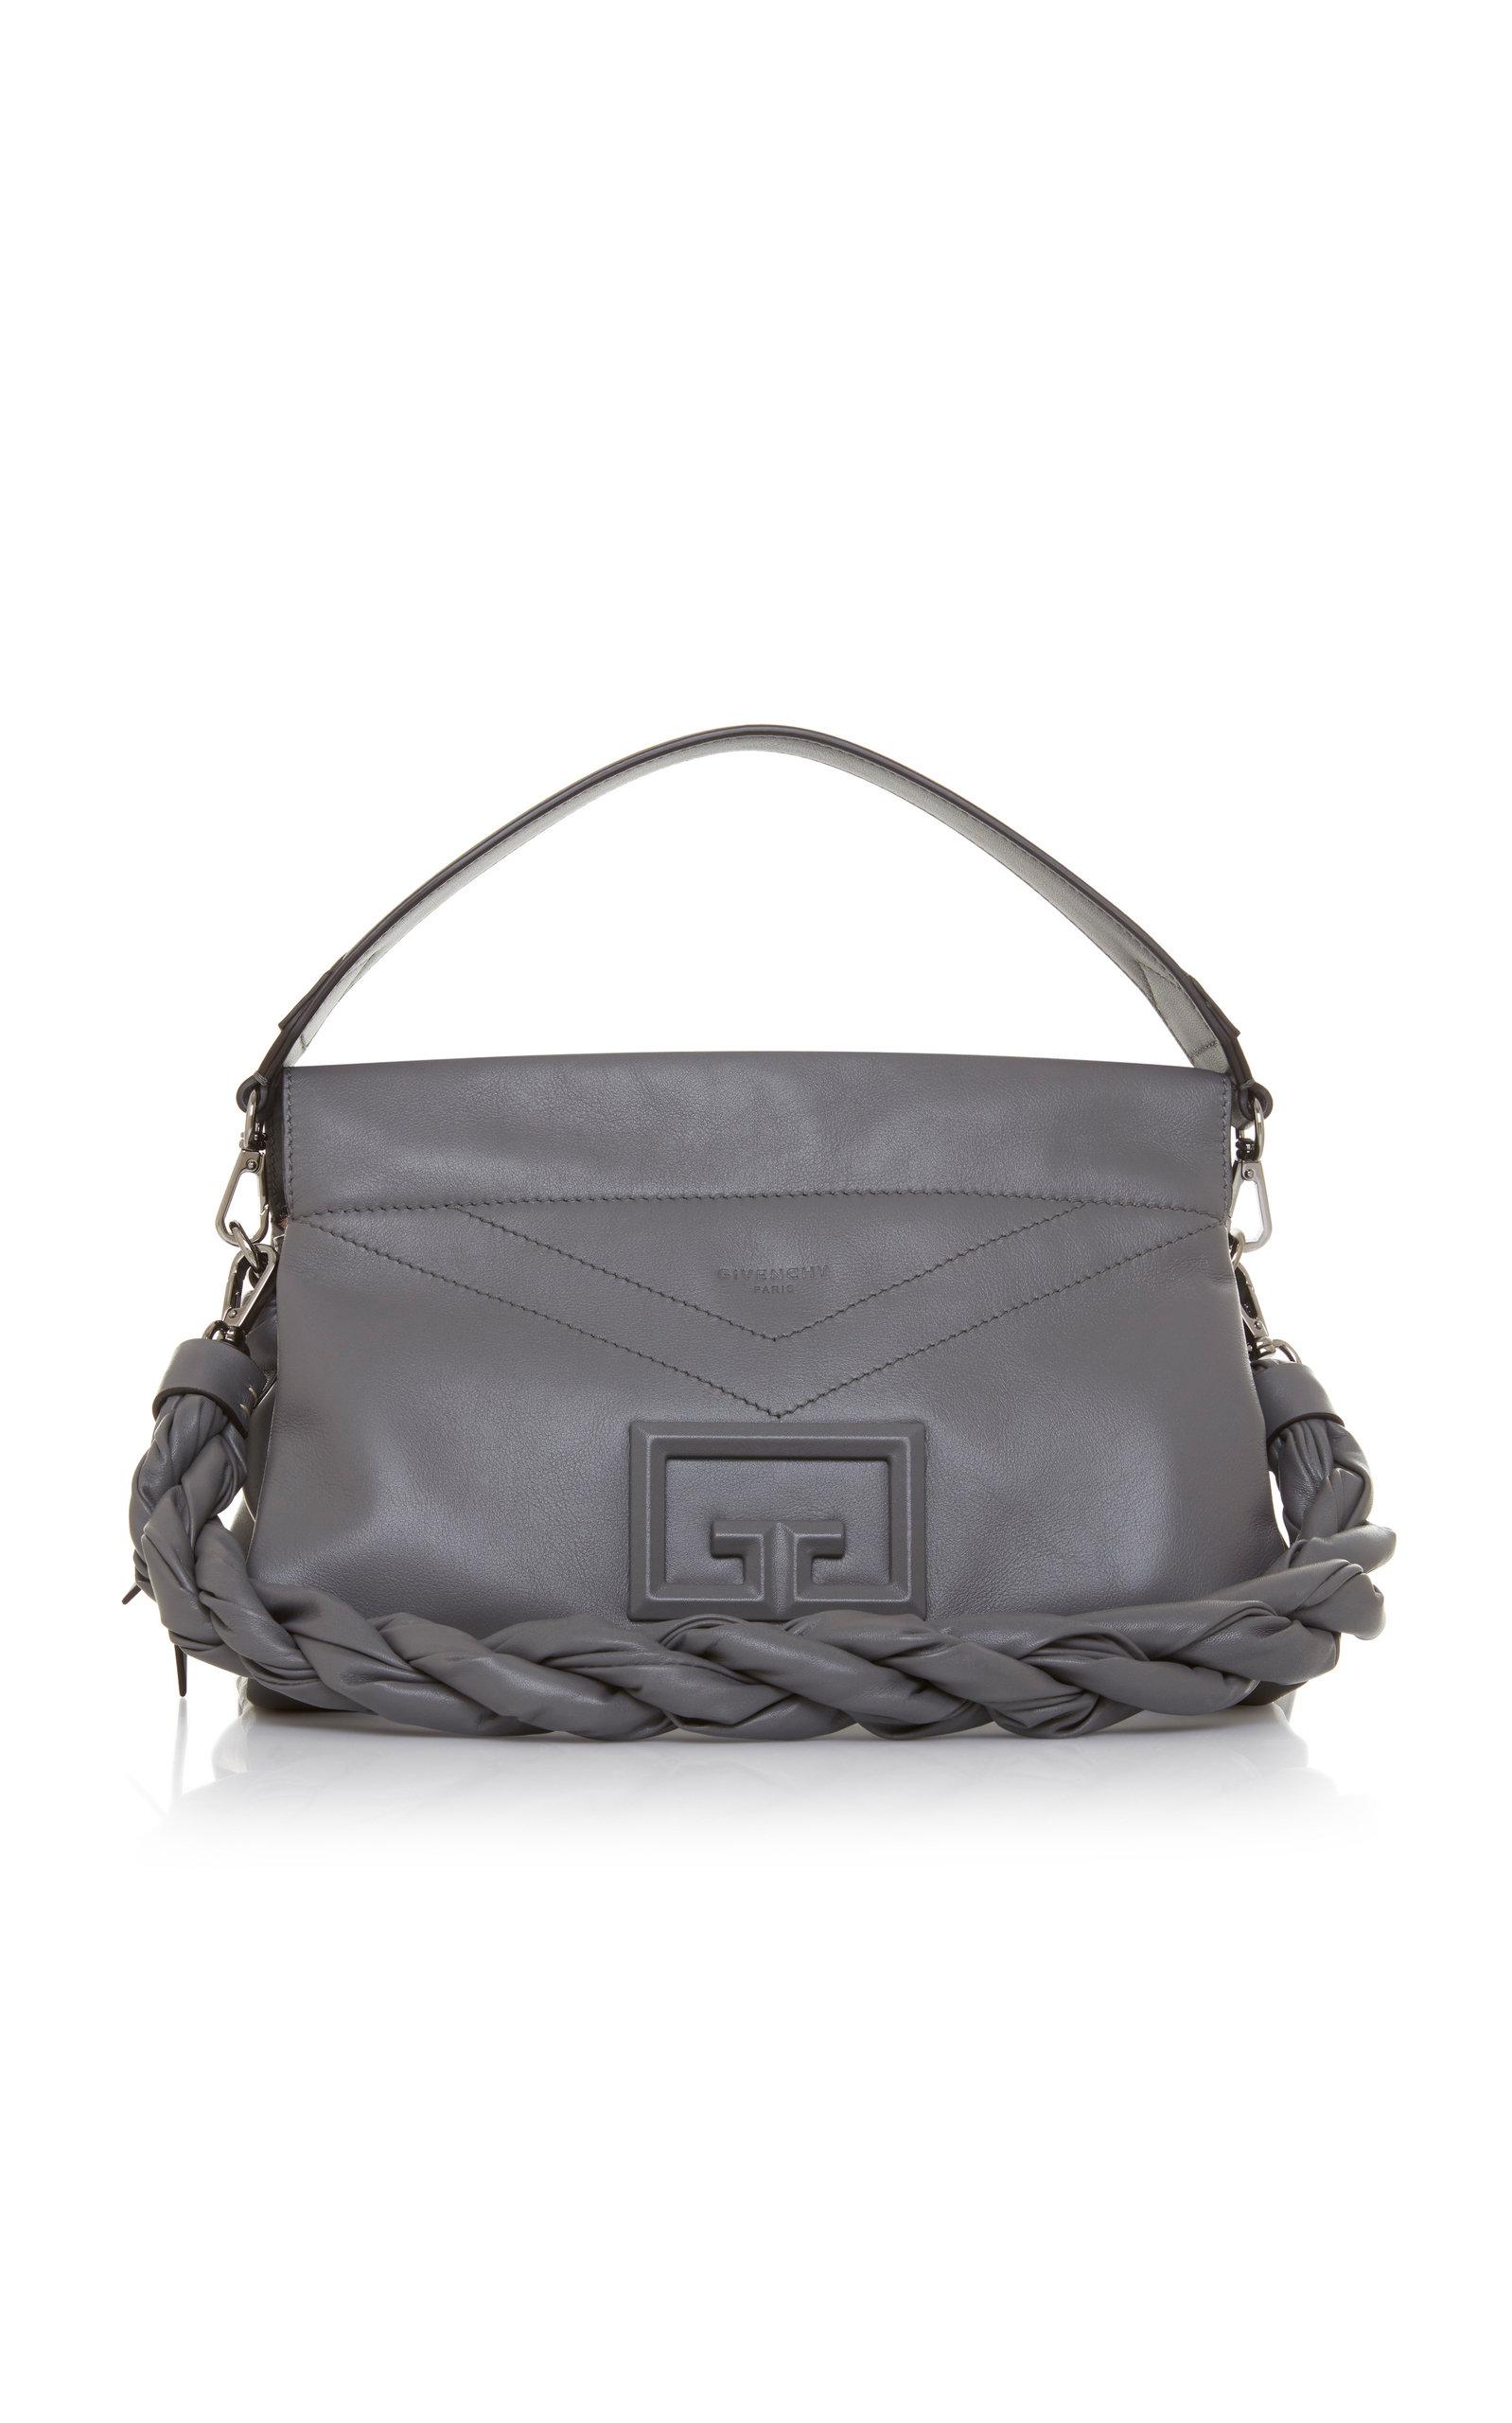 Givenchy Id93 Medium Leather Shoulder Bag in Gray | Lyst